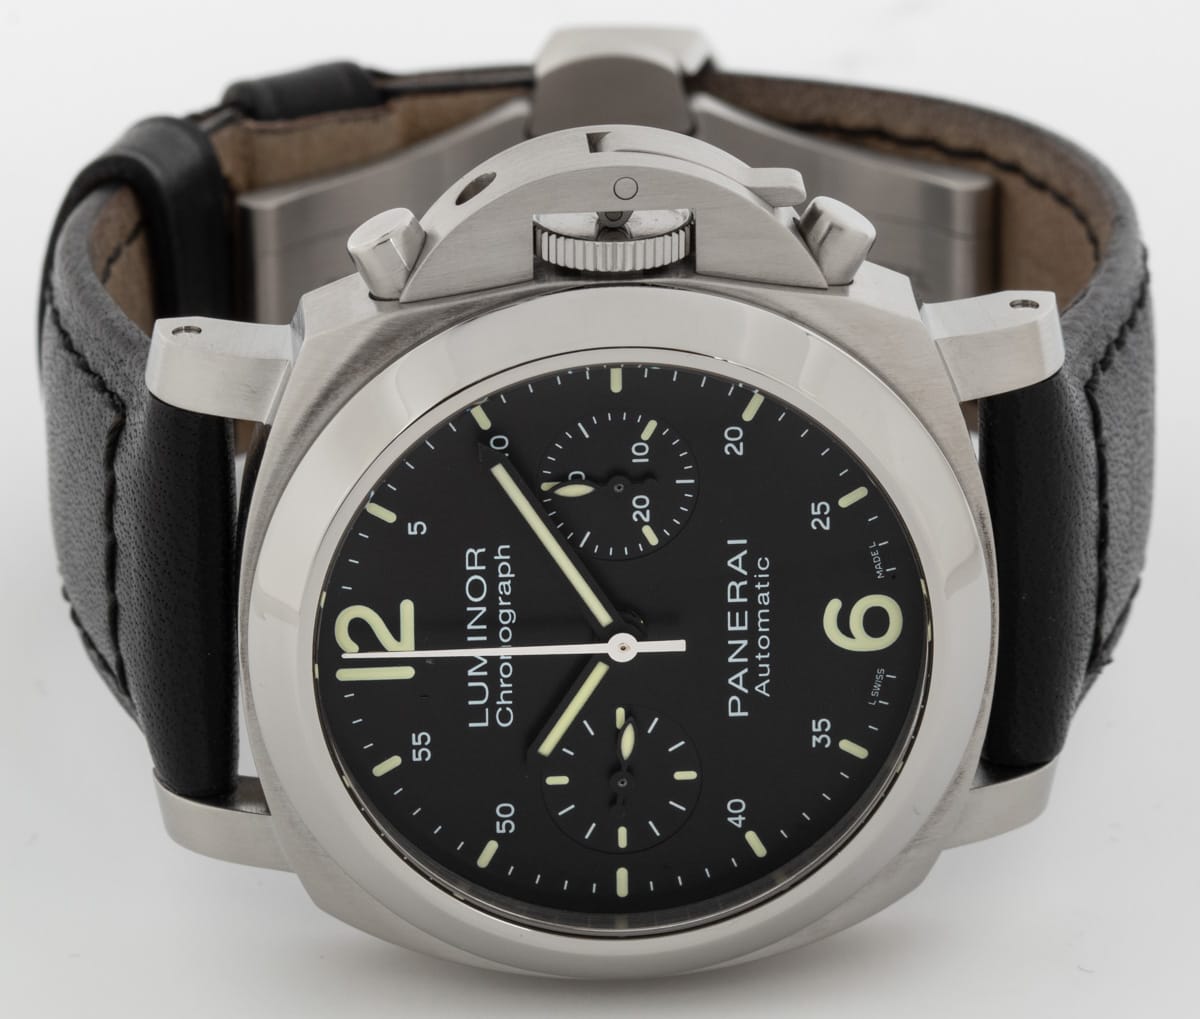 Front View of Luminor Chronograph